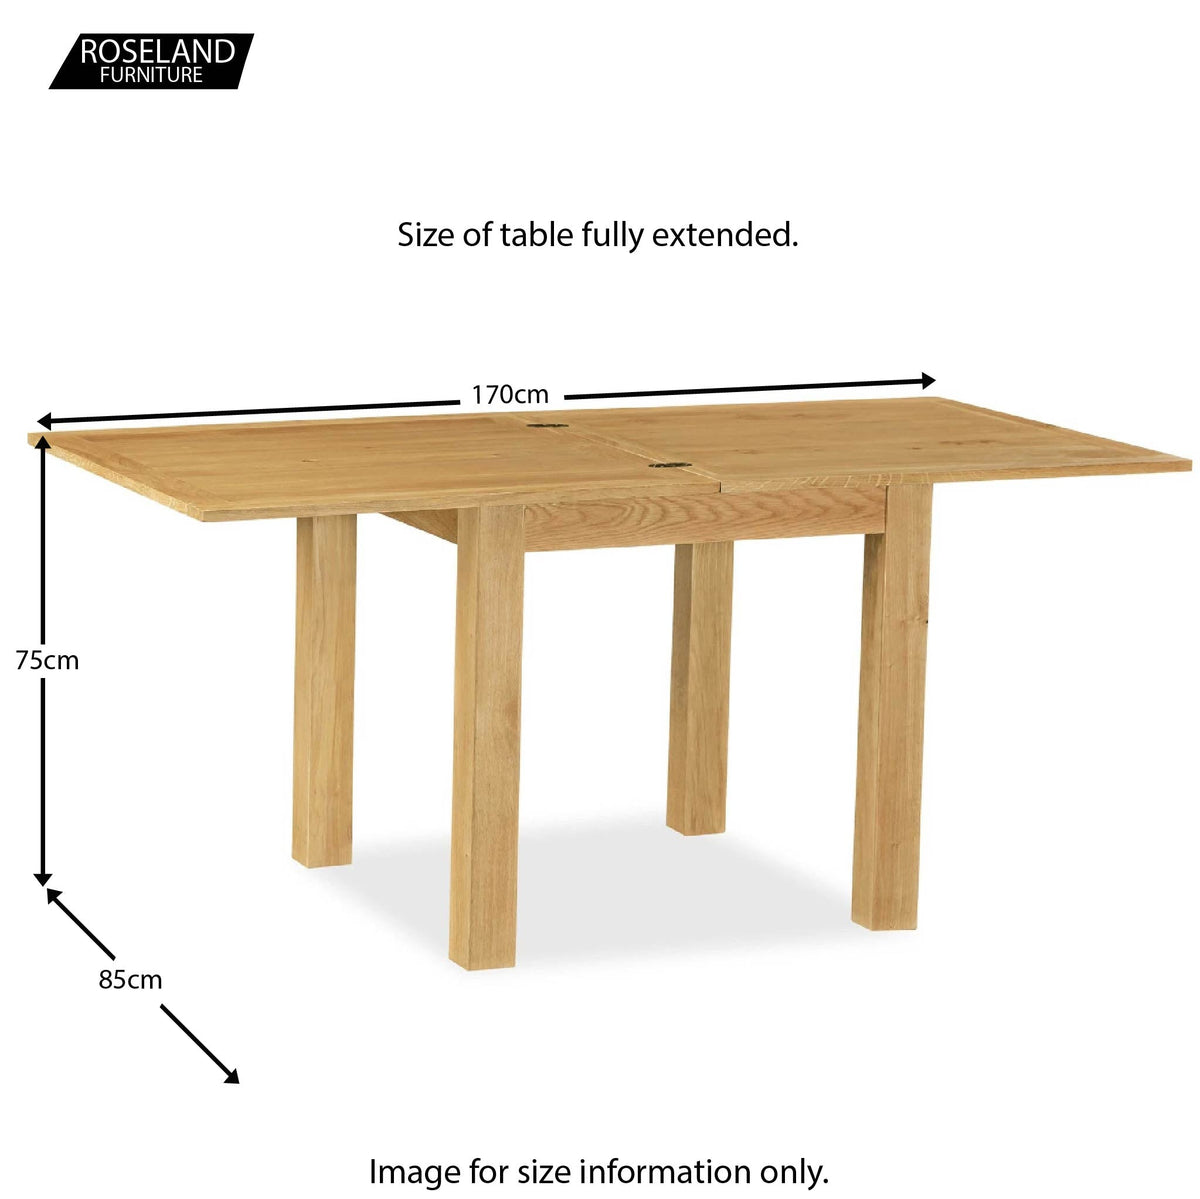 Lanner Oak Square Extending Table - Size Guide of table fully open